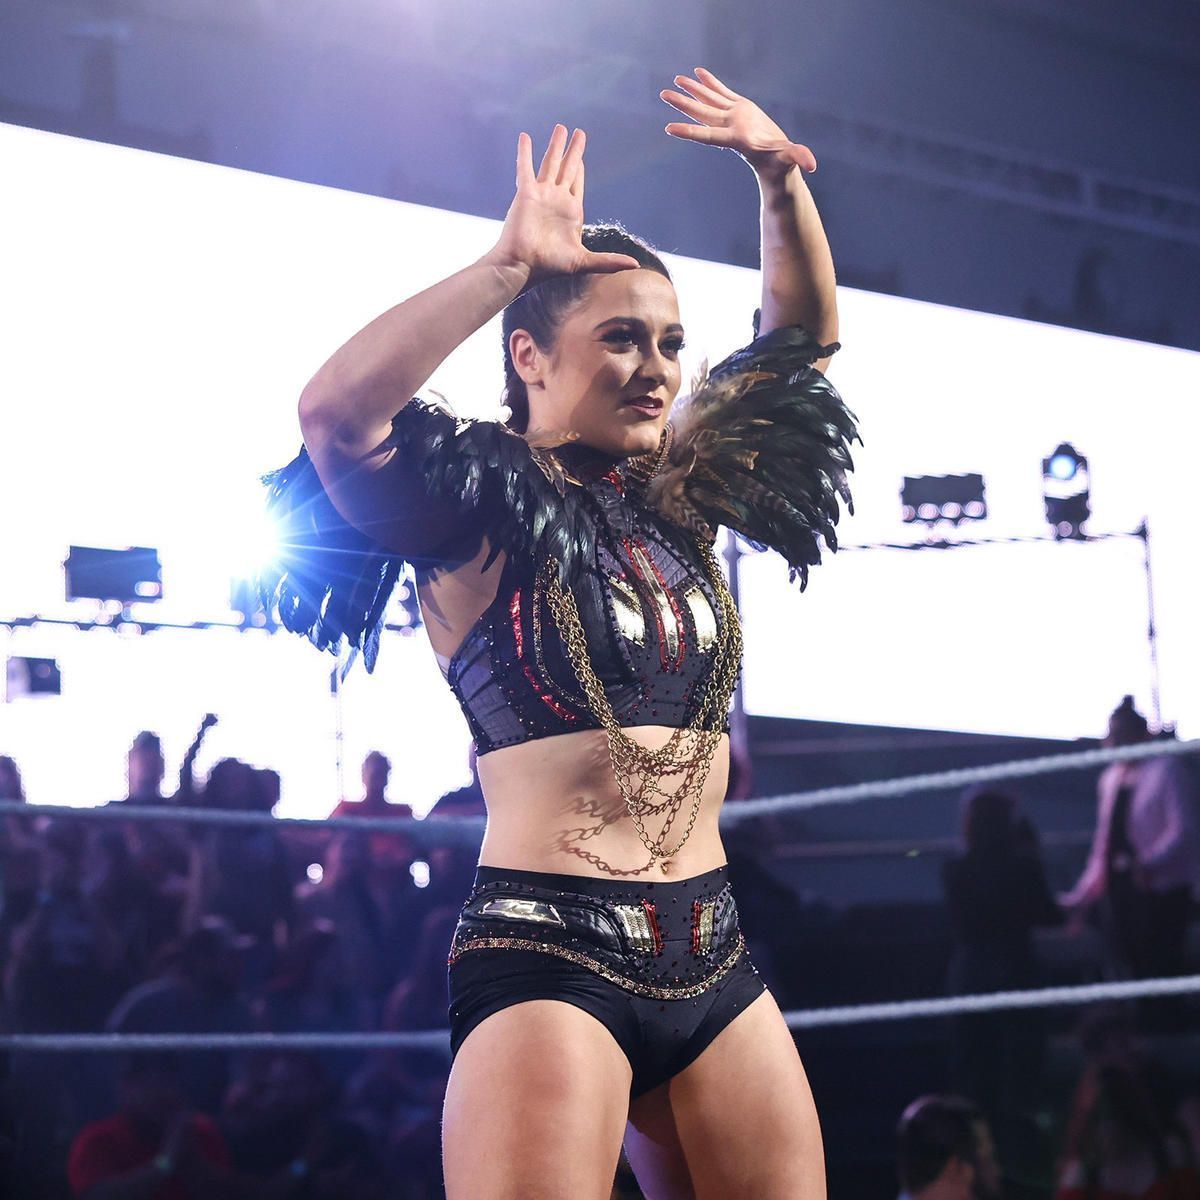 Lyra Valkyria is one of the more complete stars in NXT&#039;s women&#039;s division.